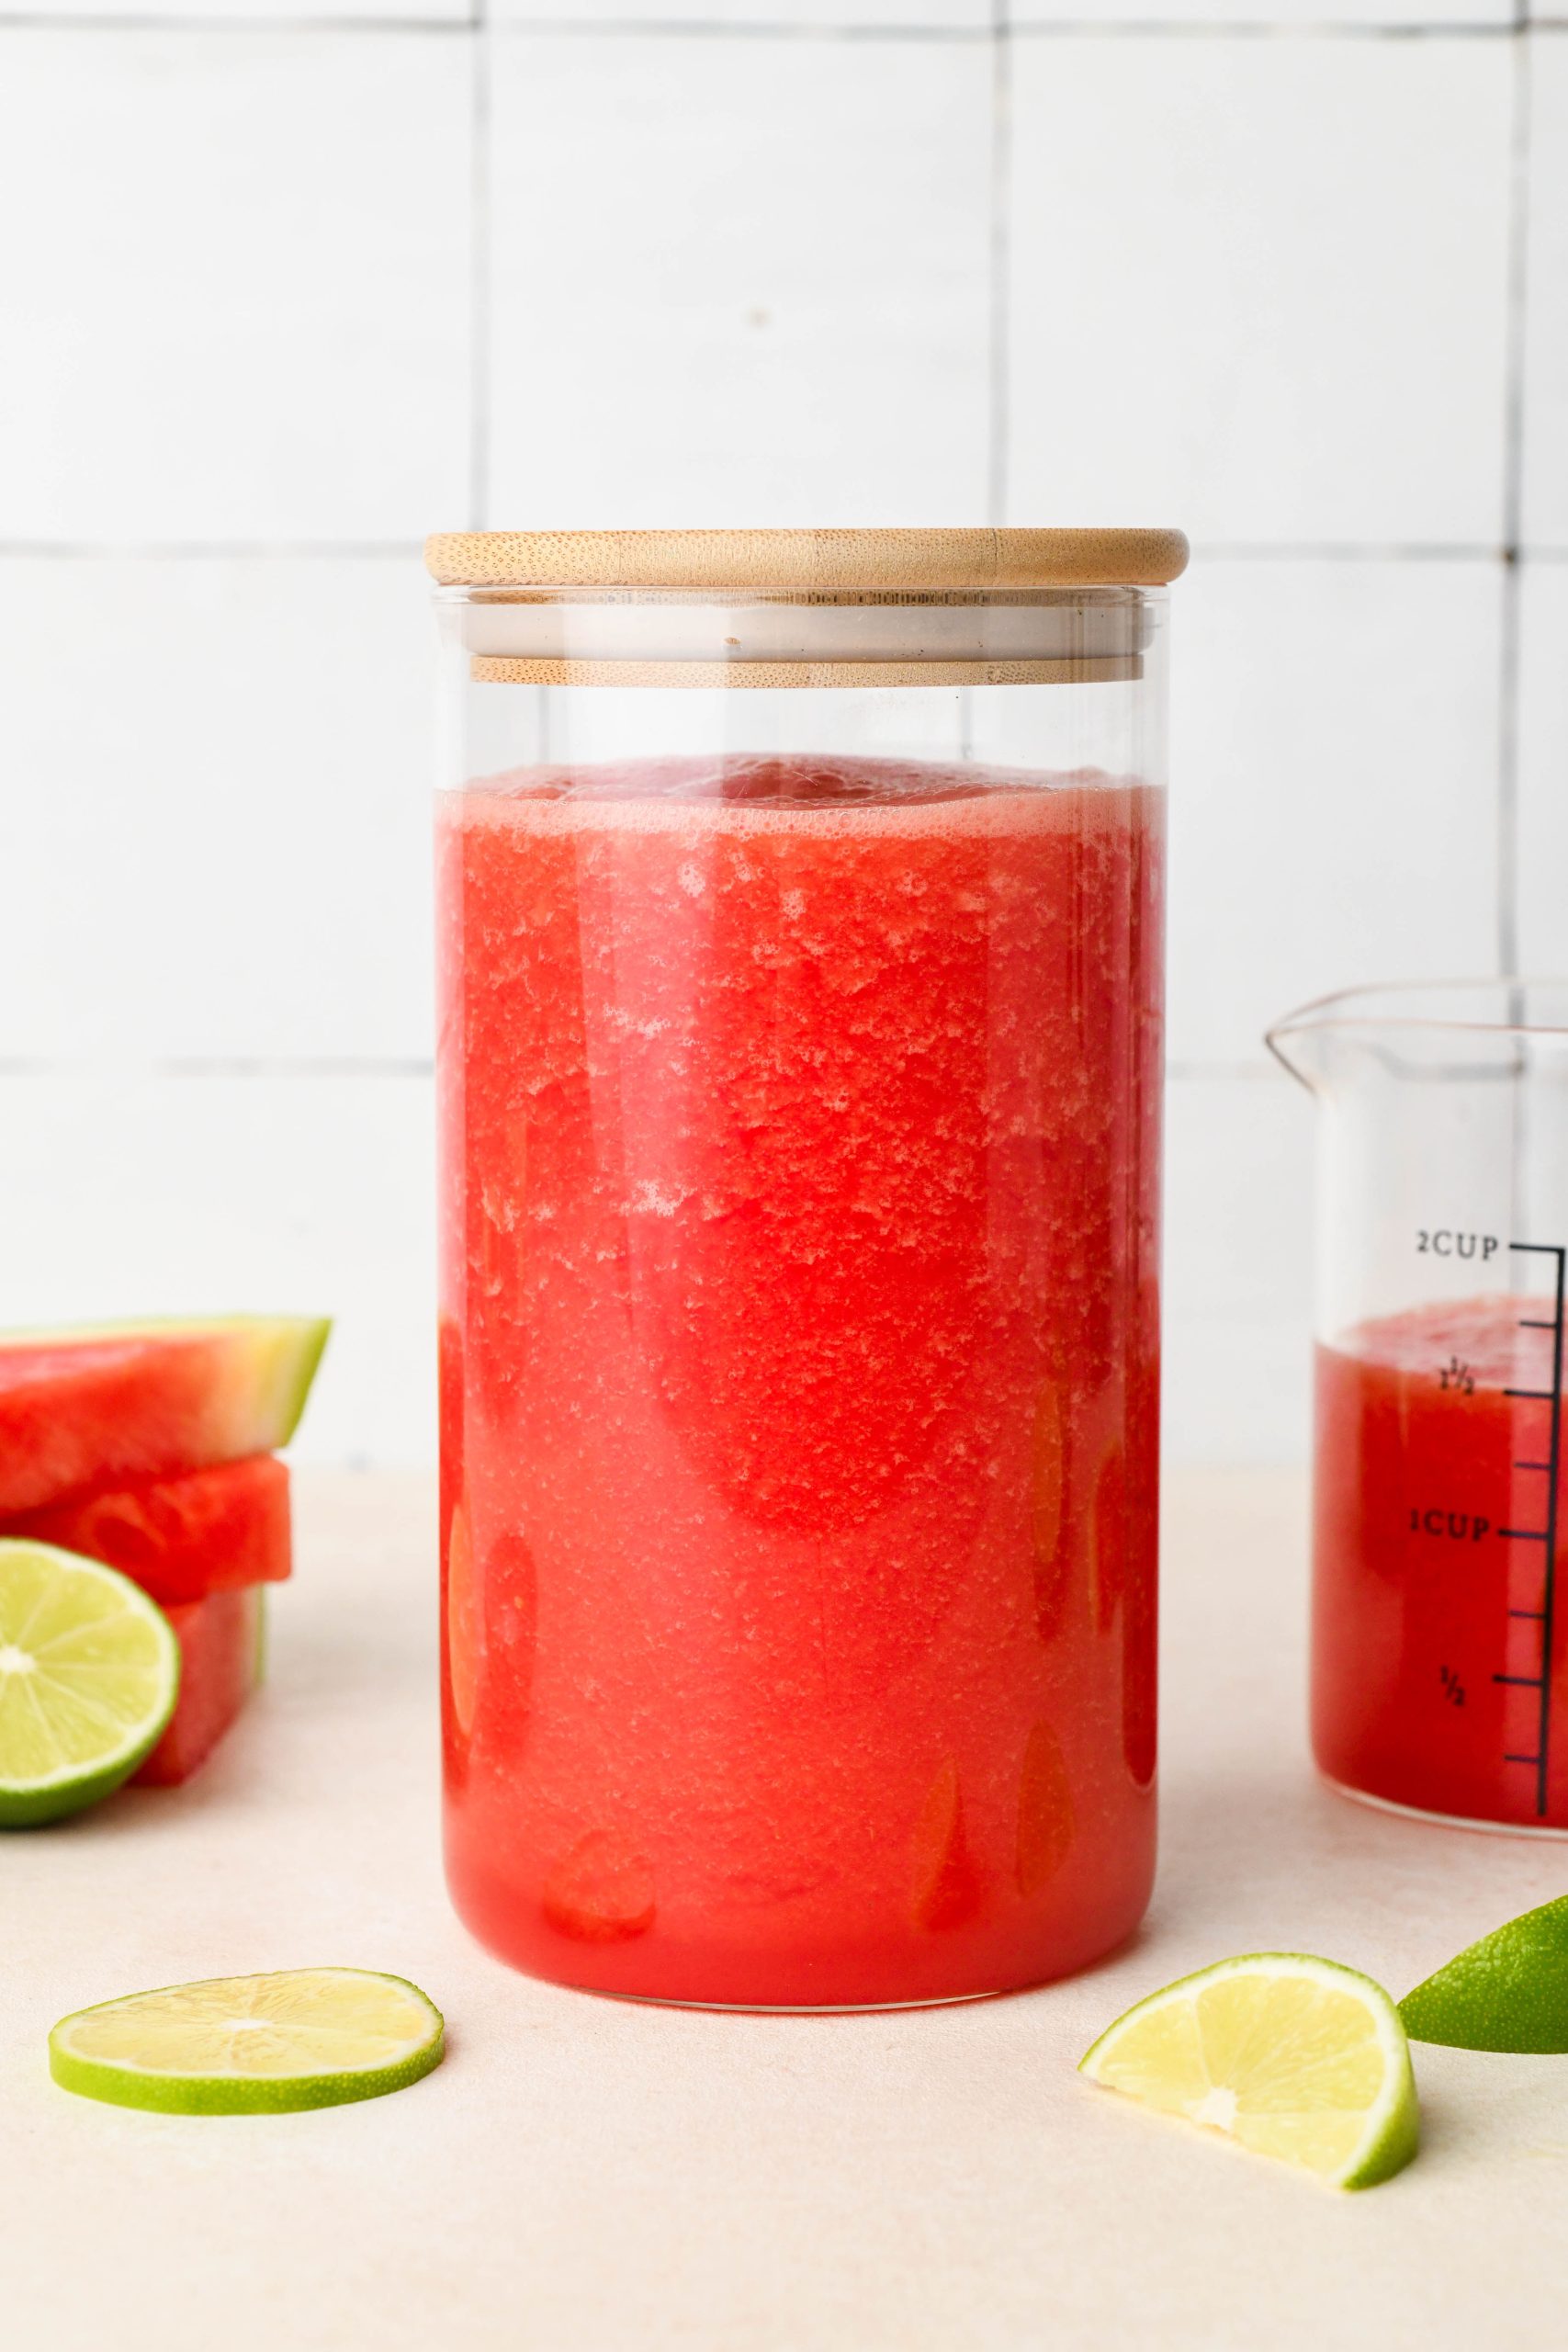 A large glass jar with a wooden lid filled with bright pink watermelon juice.